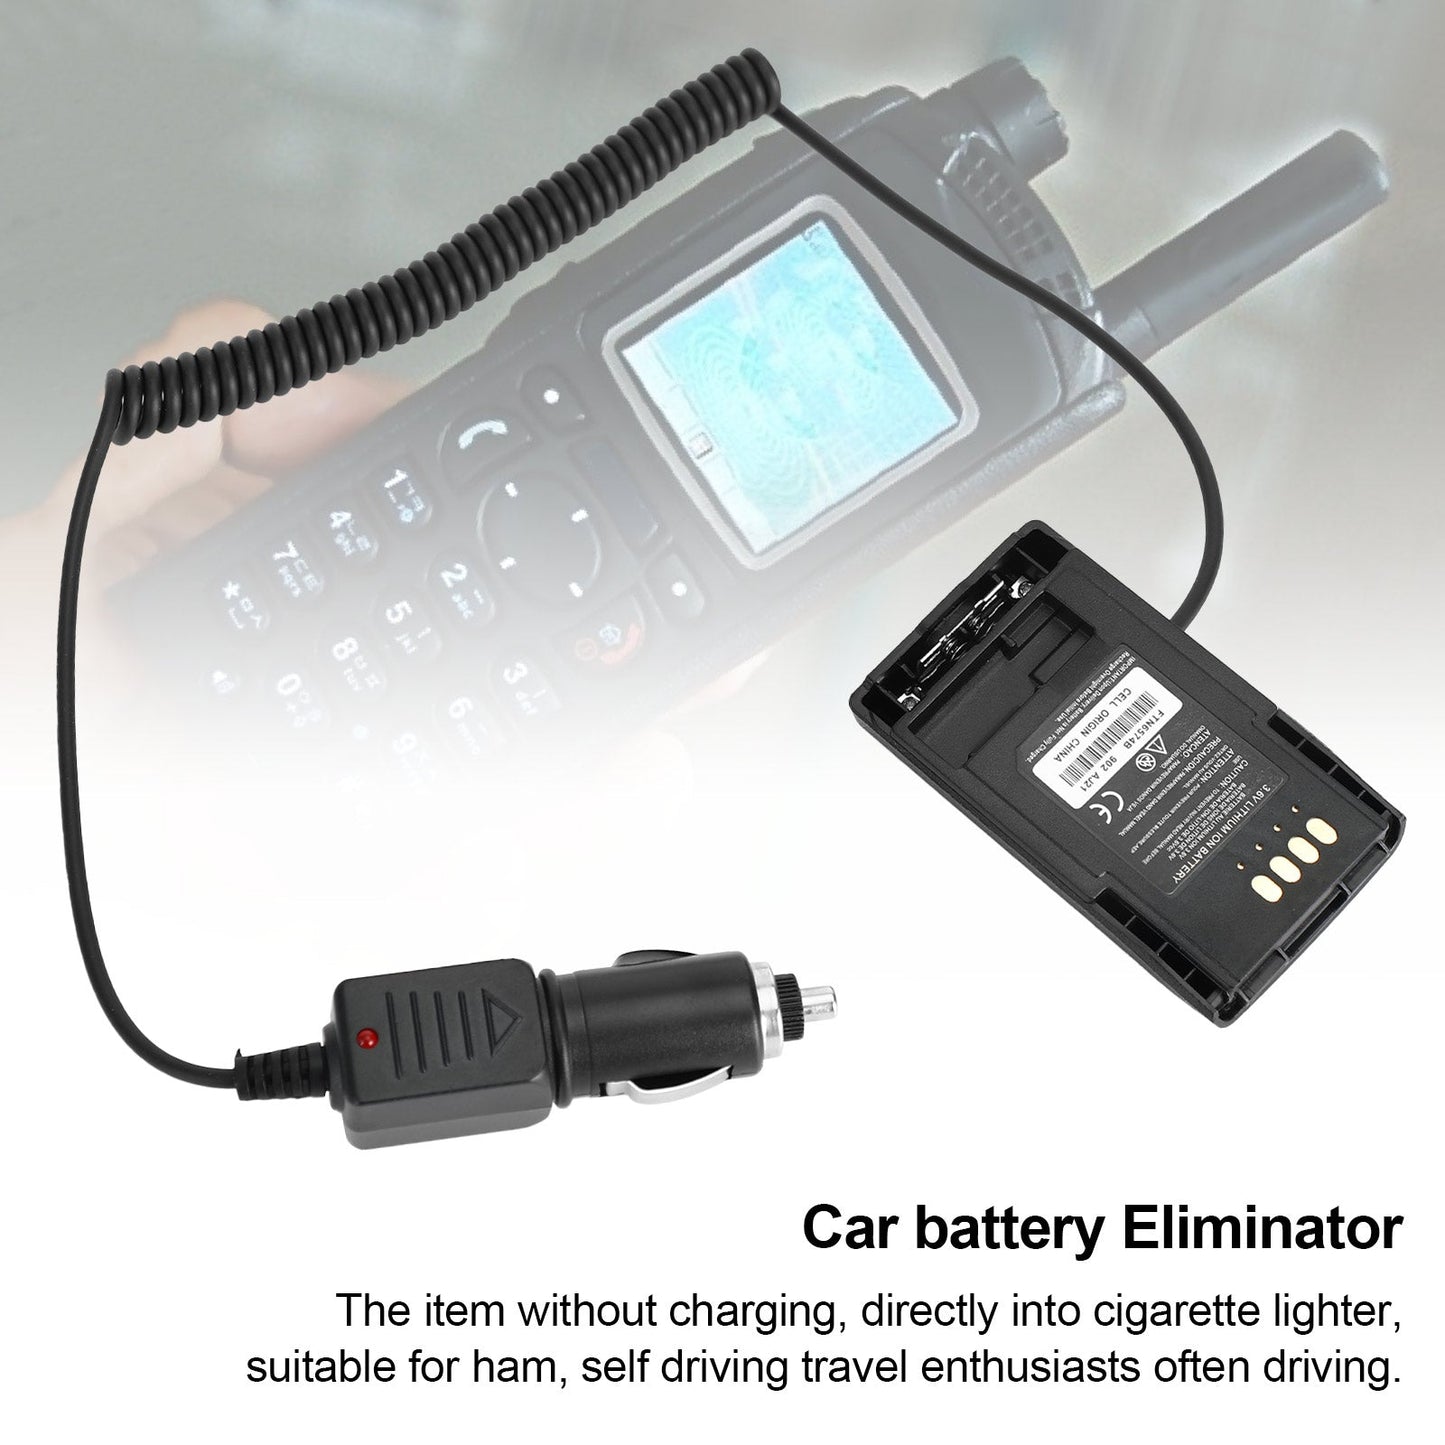 Car Charger Battery Mtp850 Eliminator Adapter For Mtp750 Mtp800 Mtp810 Radio